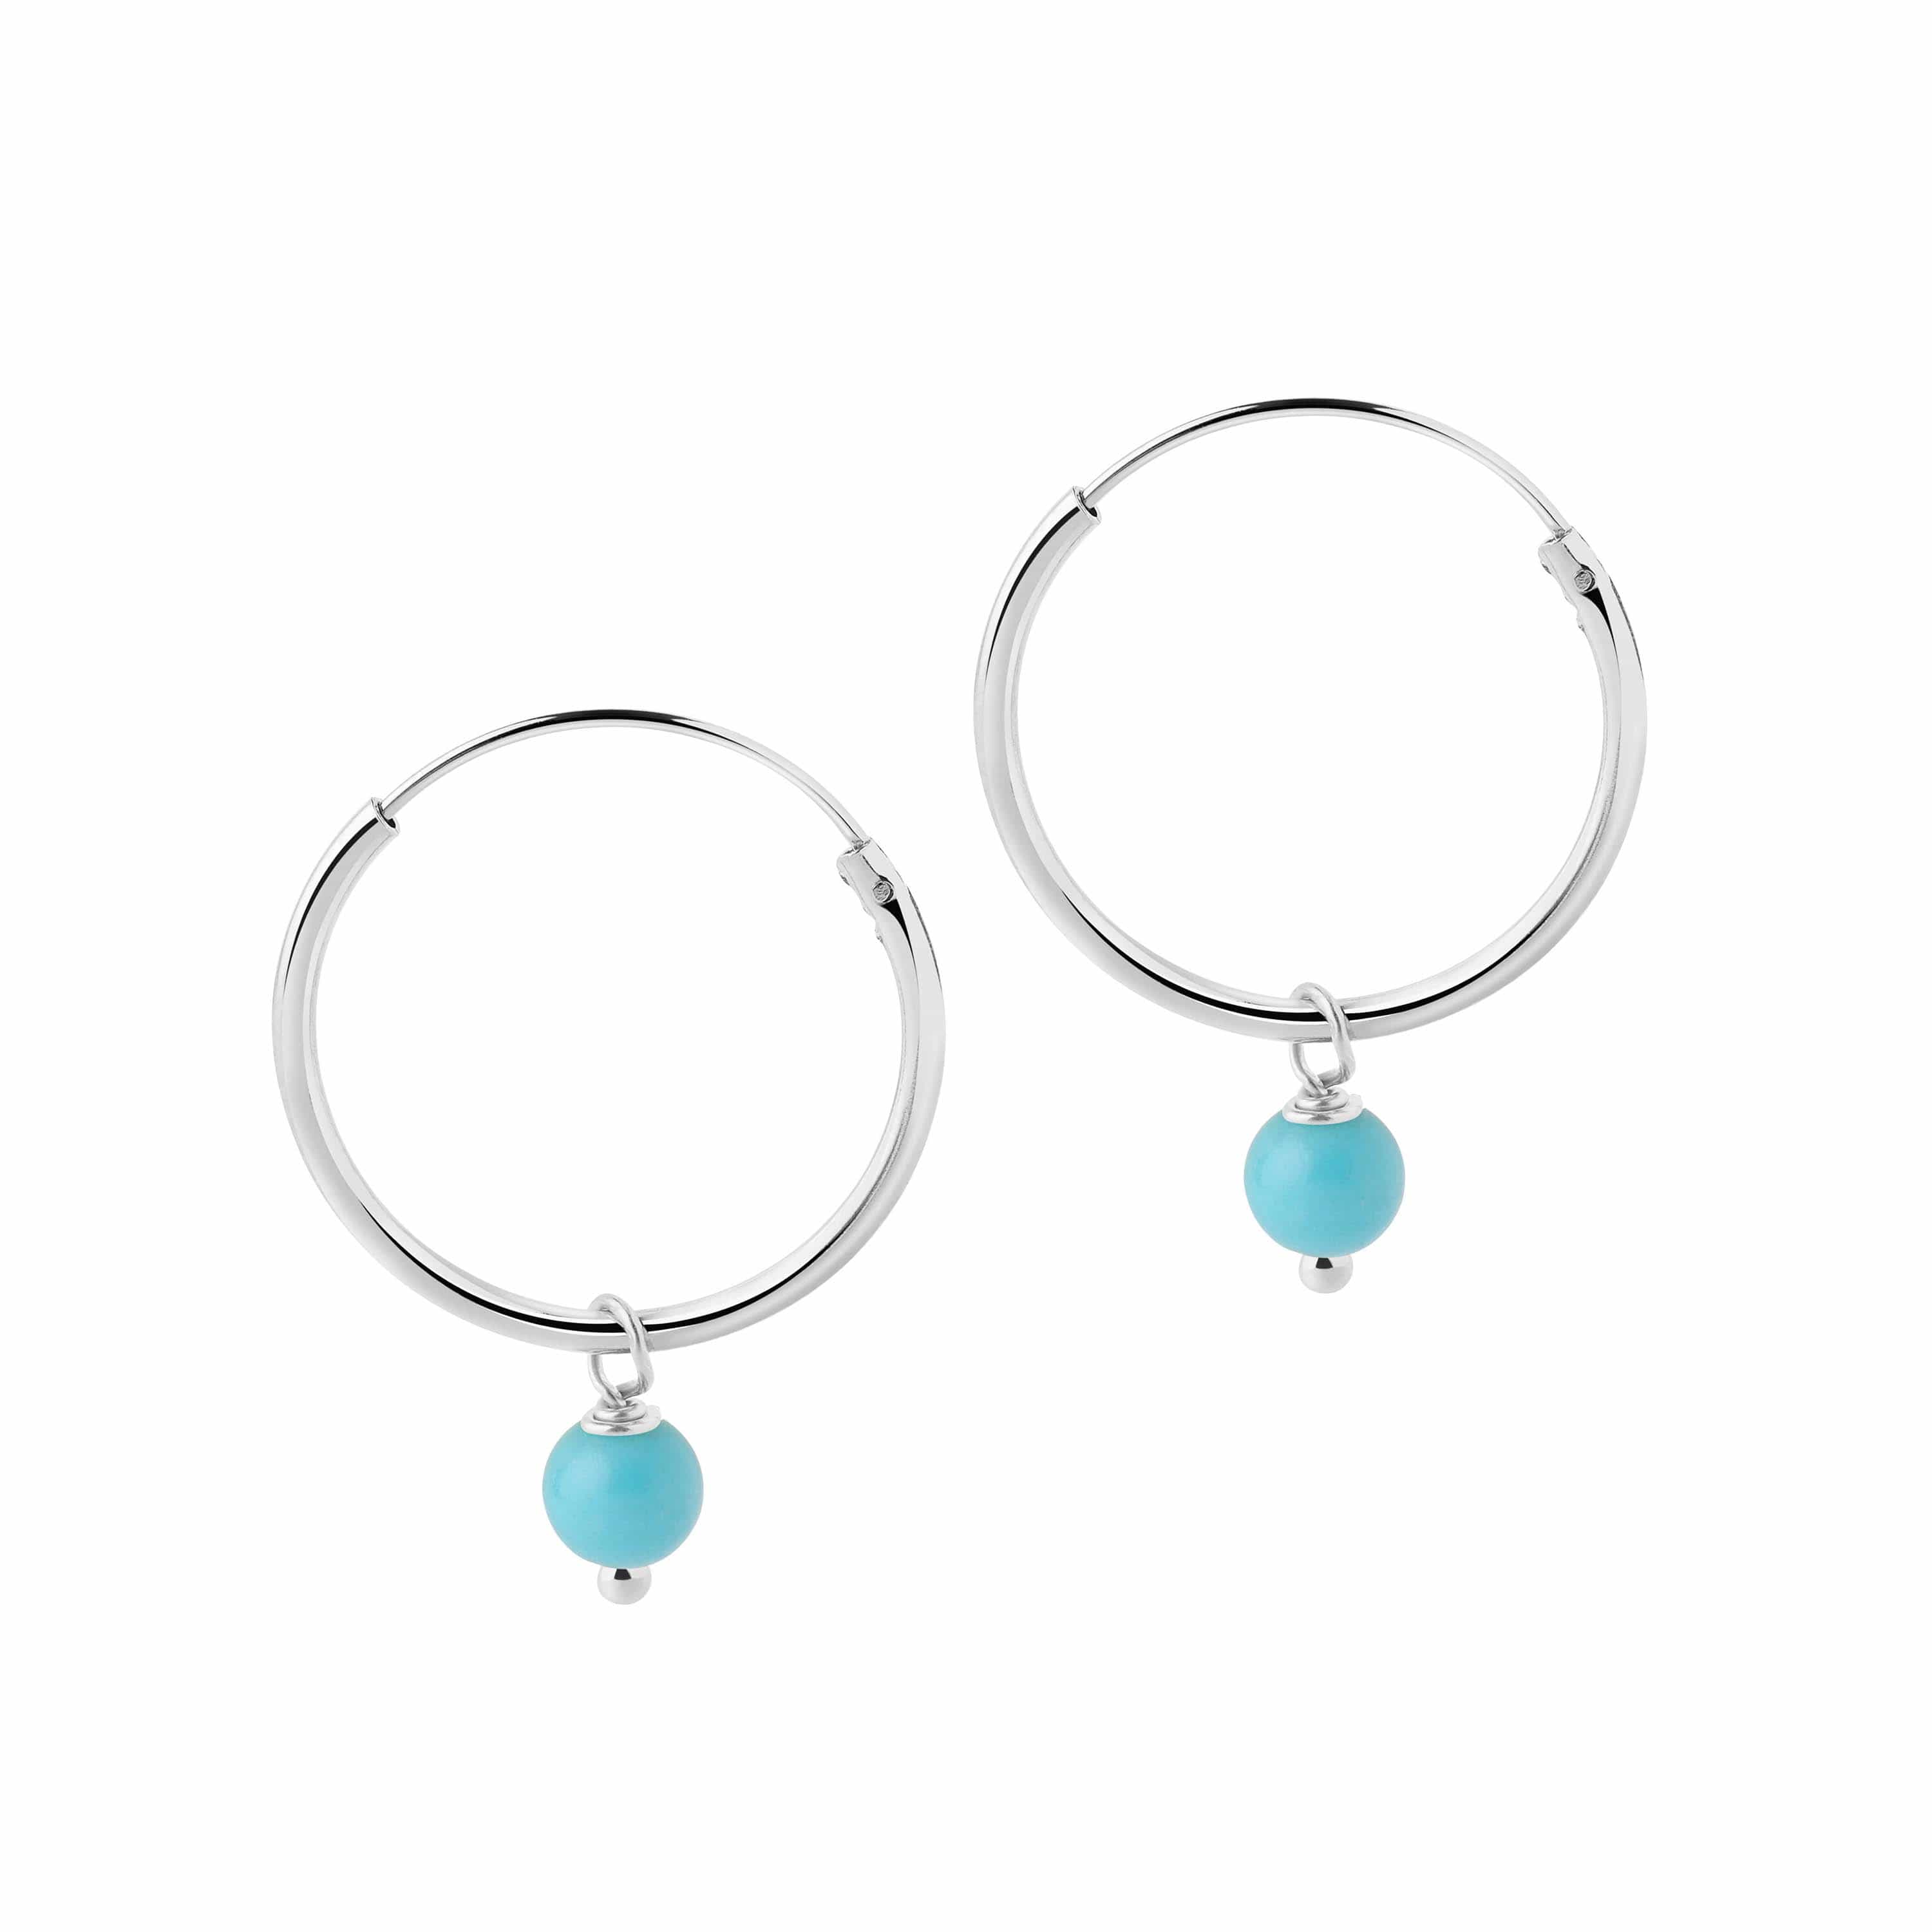 Silver Hoop Earrings with Turquoise Blue Stone